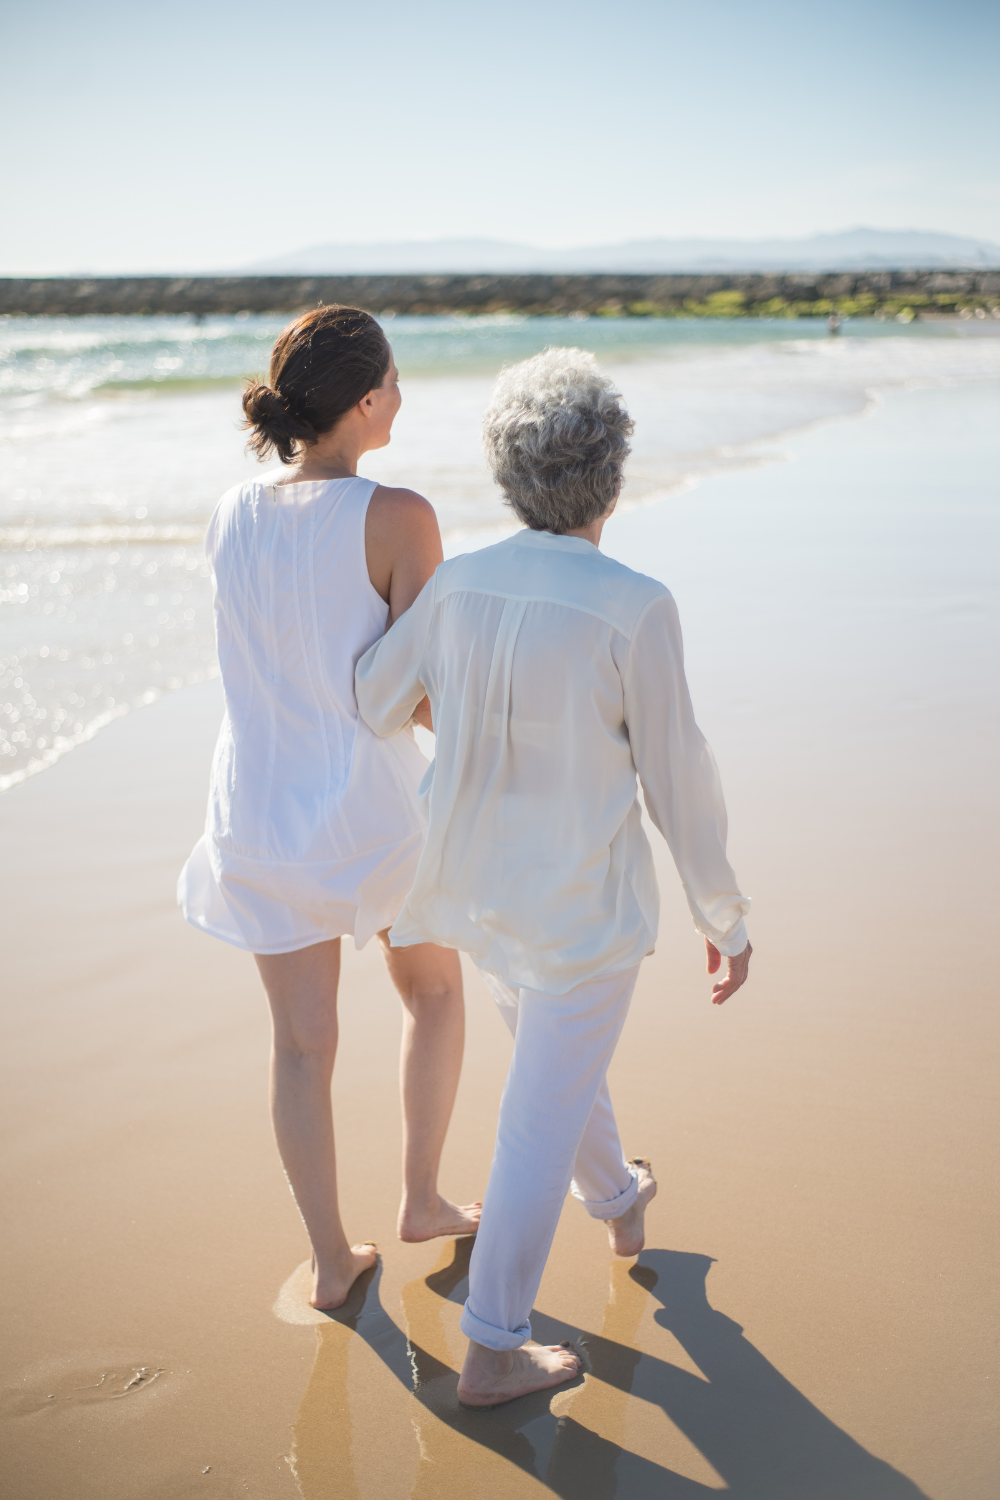 How to Take Care of Your Aging Parents?